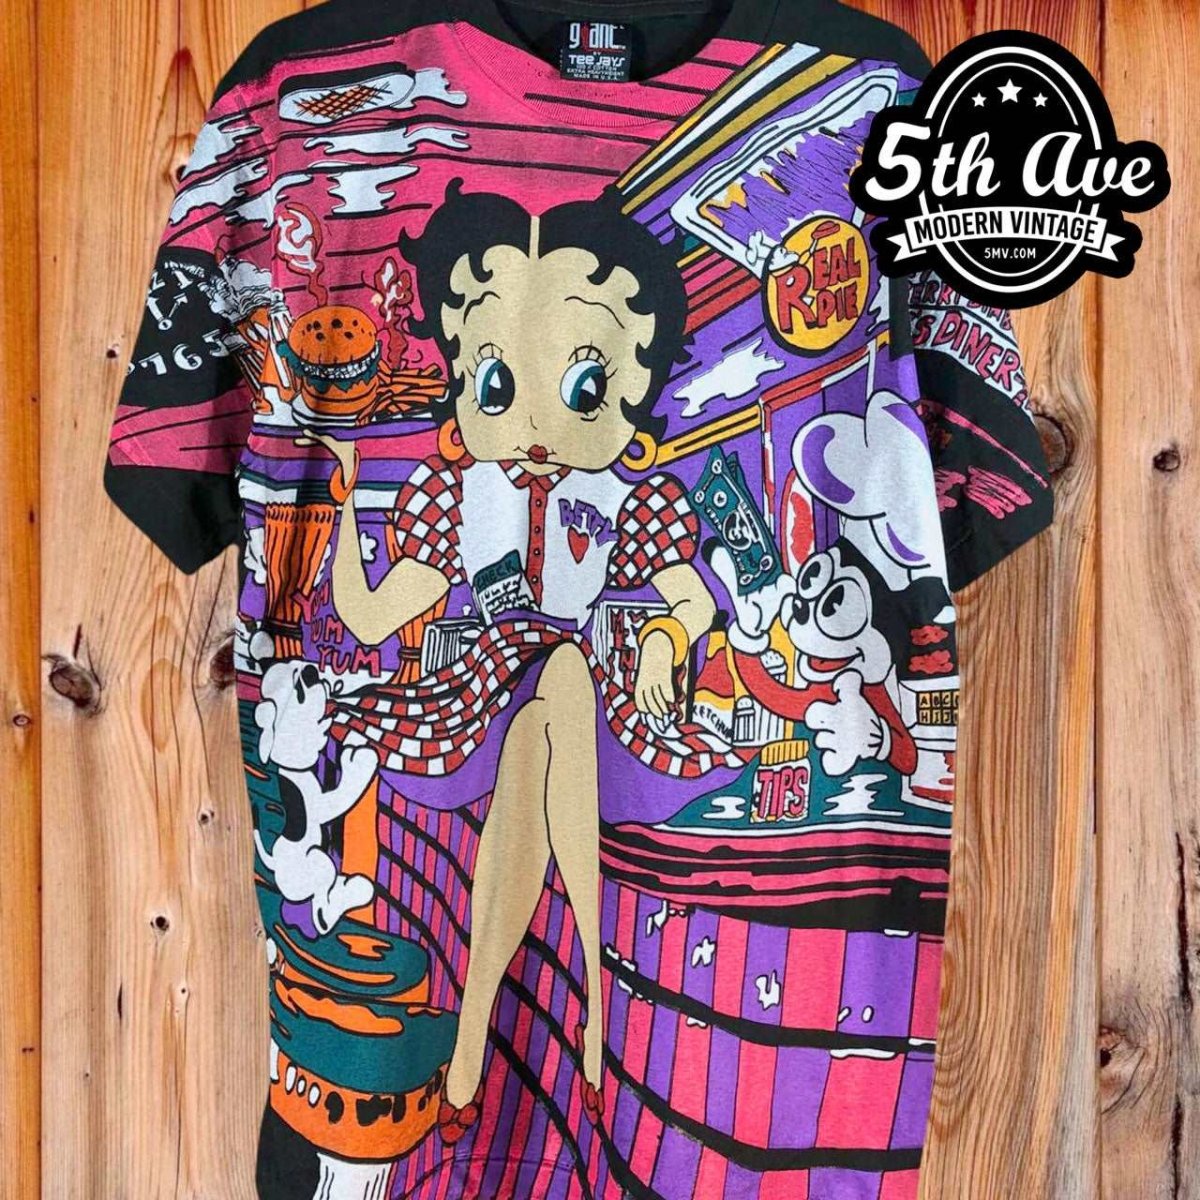 Betty Boop's Diner Served Hot & Fresh - AOP all over print New Vintage Animation T shirt - Vintage Band Shirts